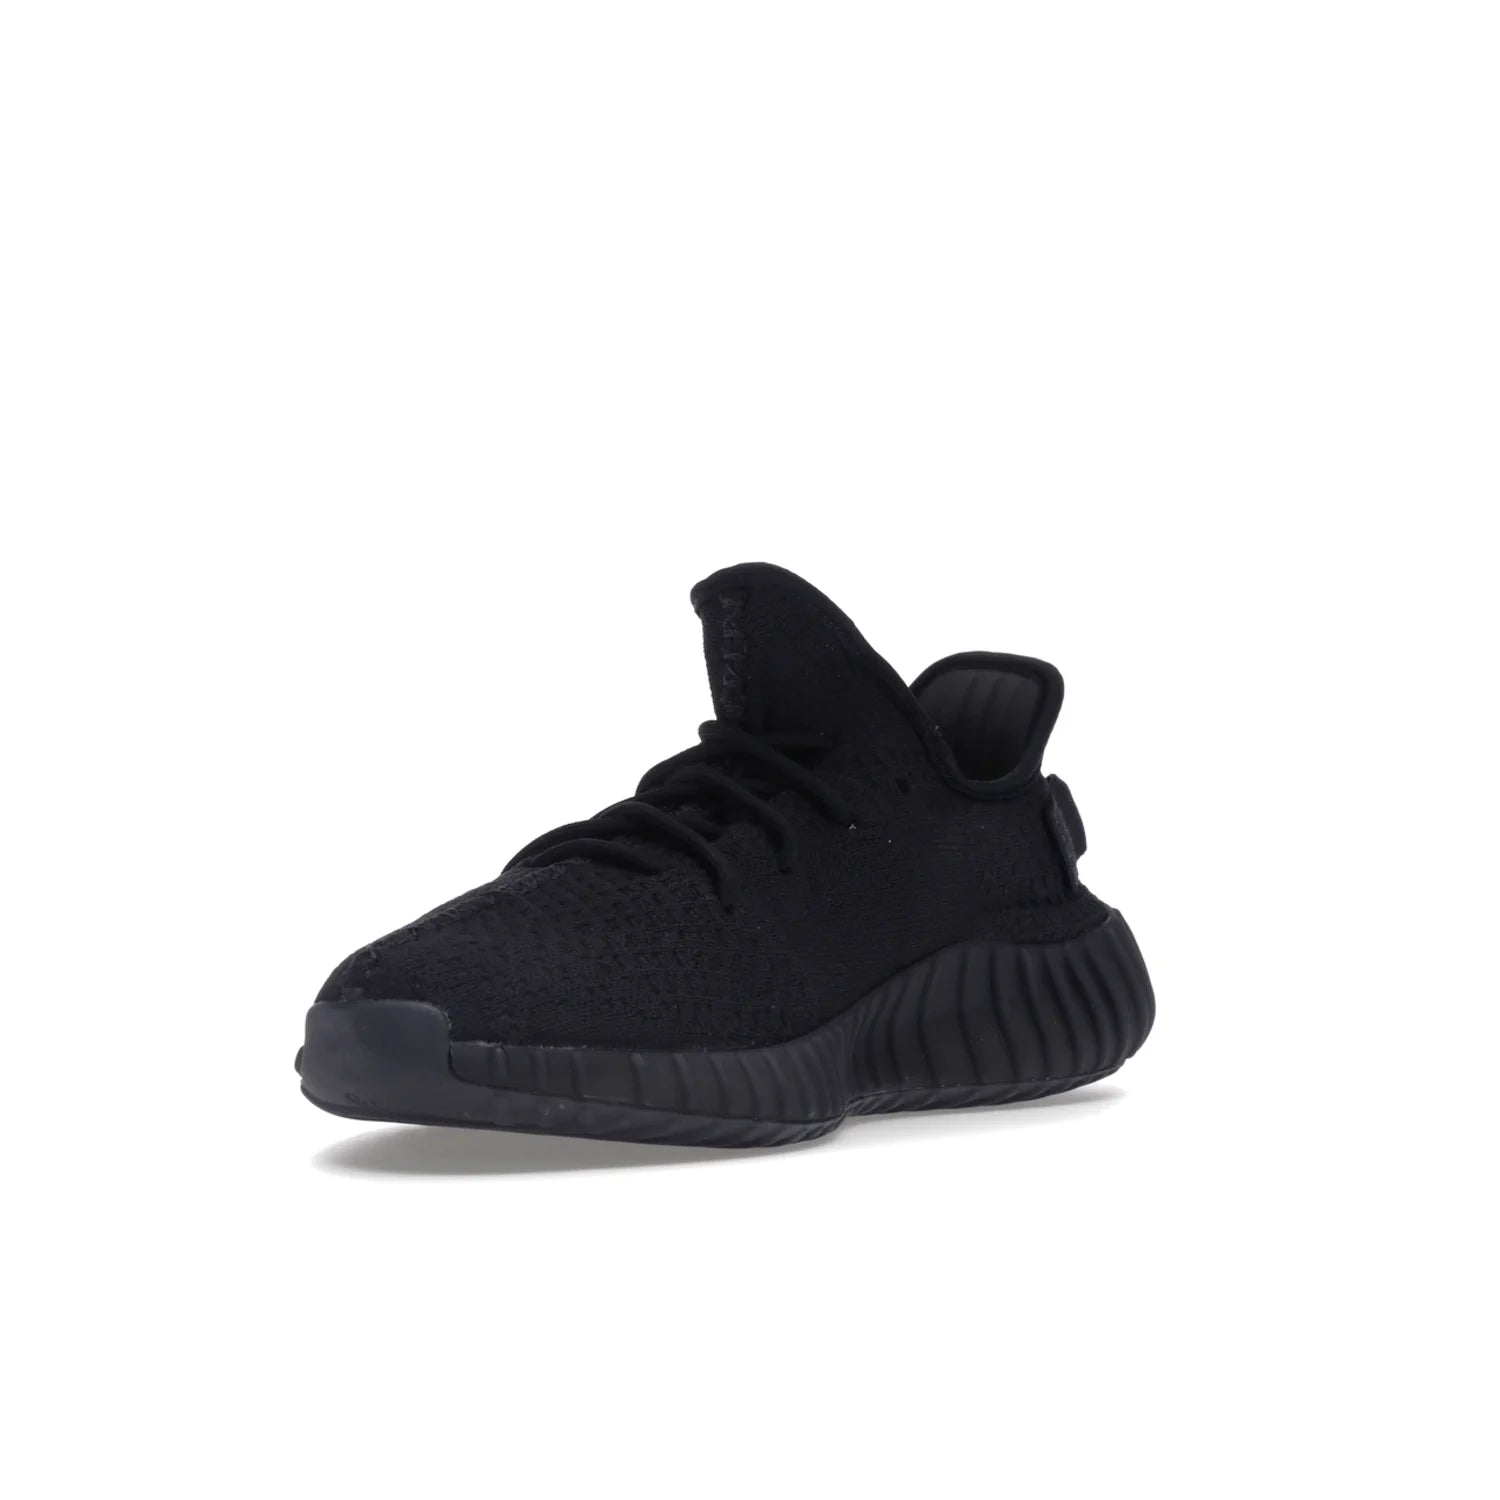 adidas Yeezy Boost 350 V2 Onyx - Image 14 - Only at www.BallersClubKickz.com - Adidas Yeezy Boost 350 V2 Onyx Triple Black shoes for comfort and style. Arriving Spring 2022.